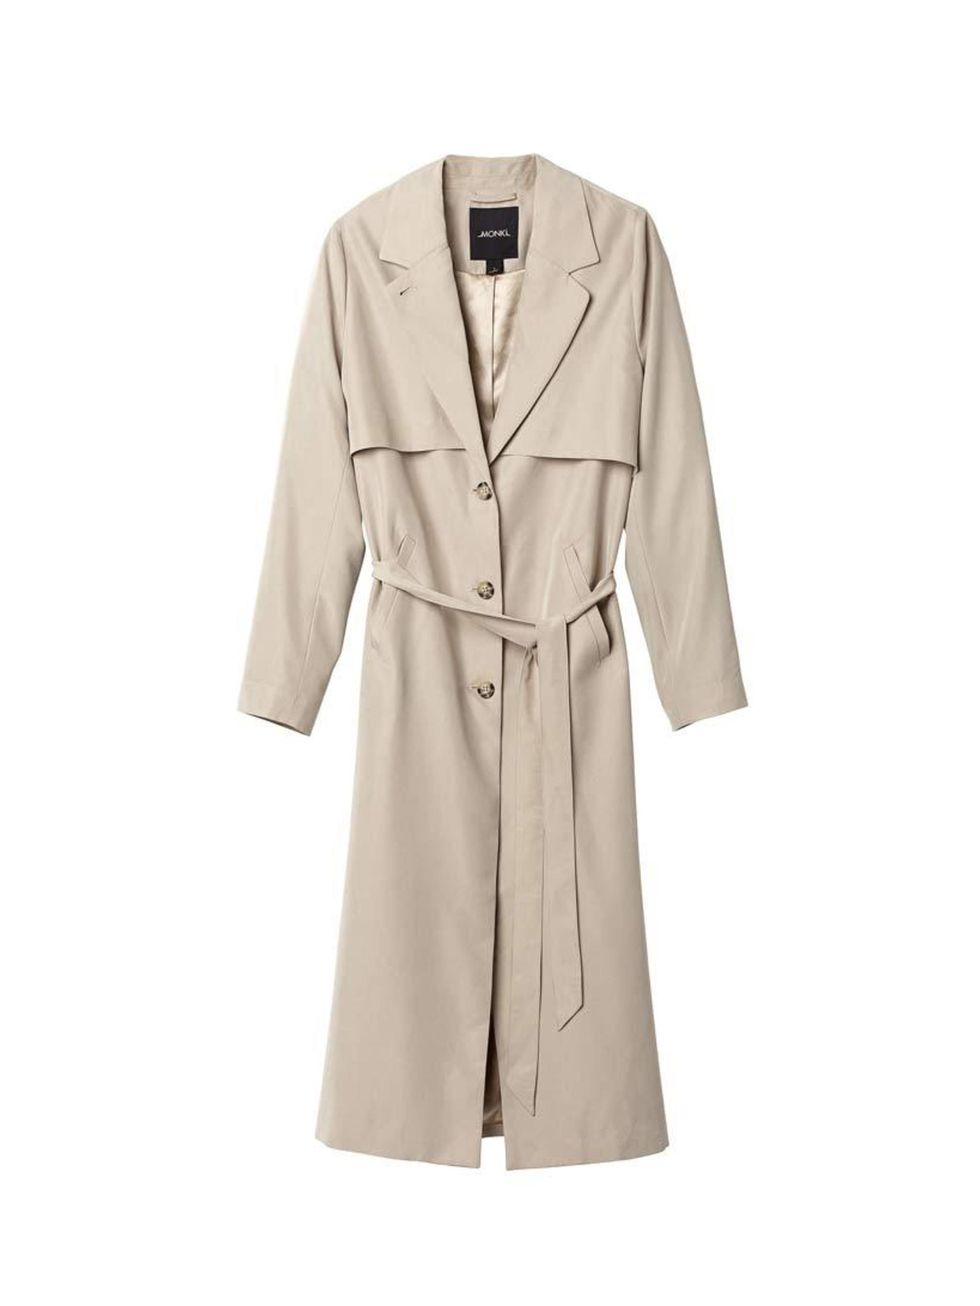 <p>Spring is coming and hopefully, planning to stay!</p><p>The lightweight coat is the perfect piece to see you through to summer. It's easy to wear and works for both bright spring days and chilly evenings -  throw it on over a jumper or a nice shirt. </